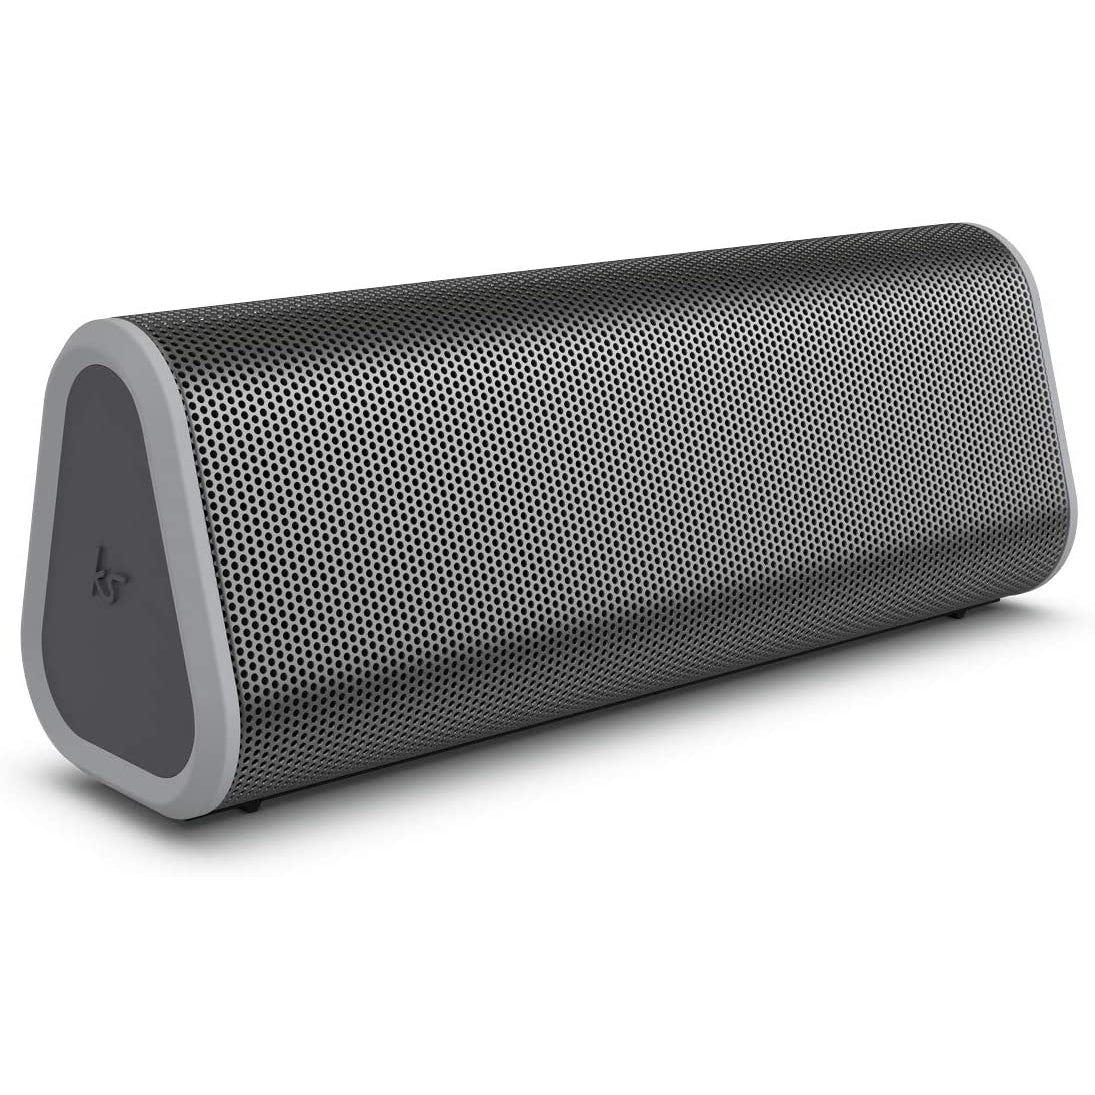 KitSound BoomBar 50 Bluetooth Speaker – Wireless Portable Speaker with IP67 Waterproof Rating and 22 Hours Play Time